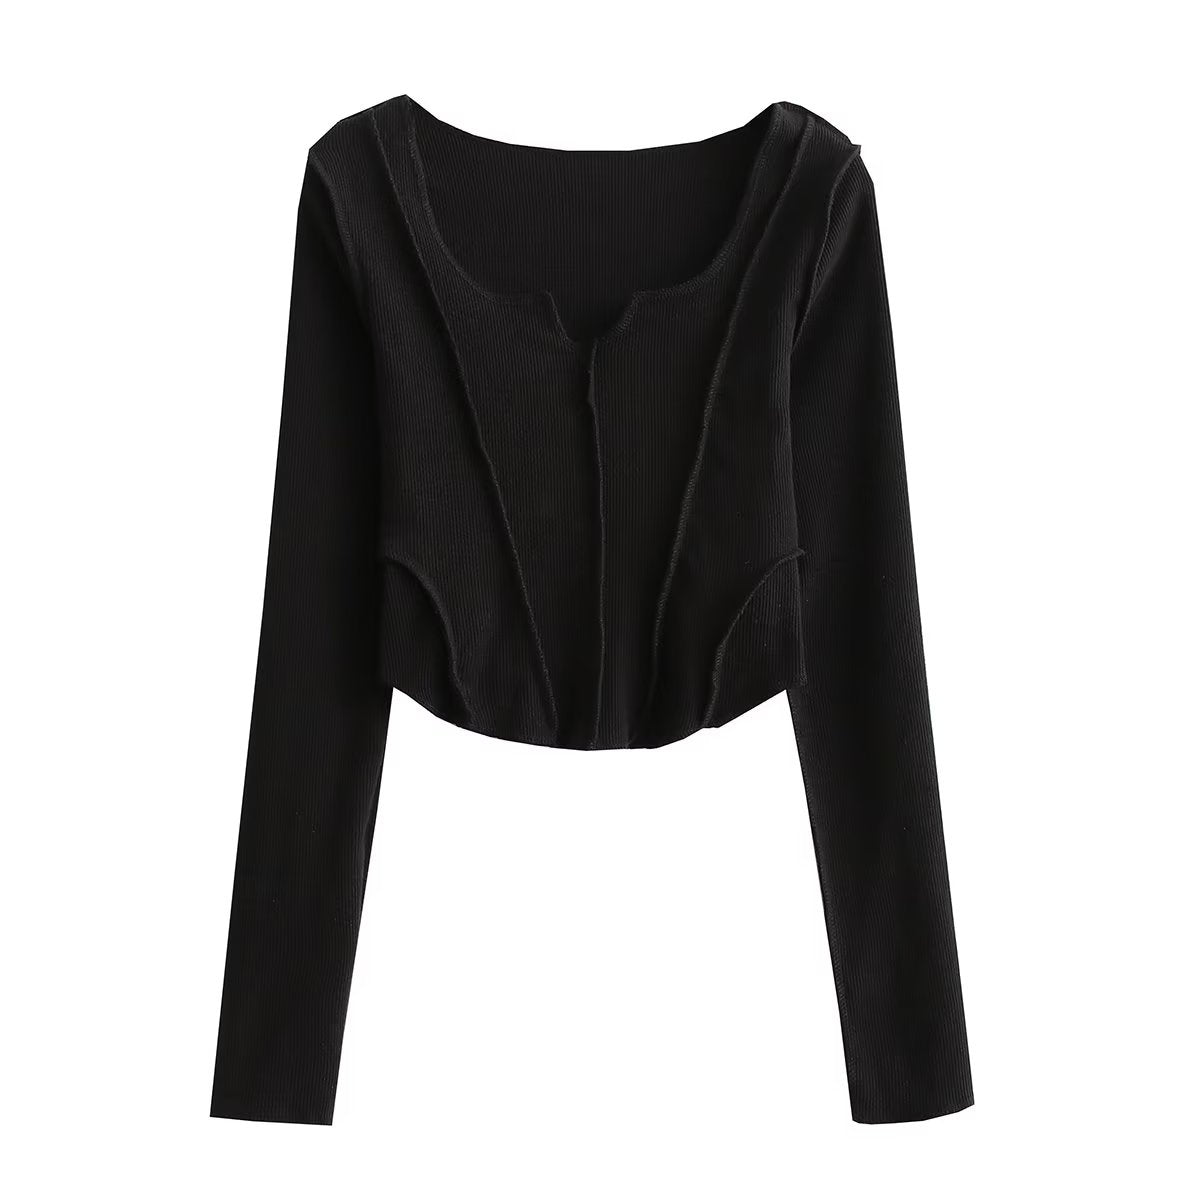 Reverse Stitching Stitching Long Sleeve T shirt Women Autumn Sexy Slim Curved Square Collar Cropped Top